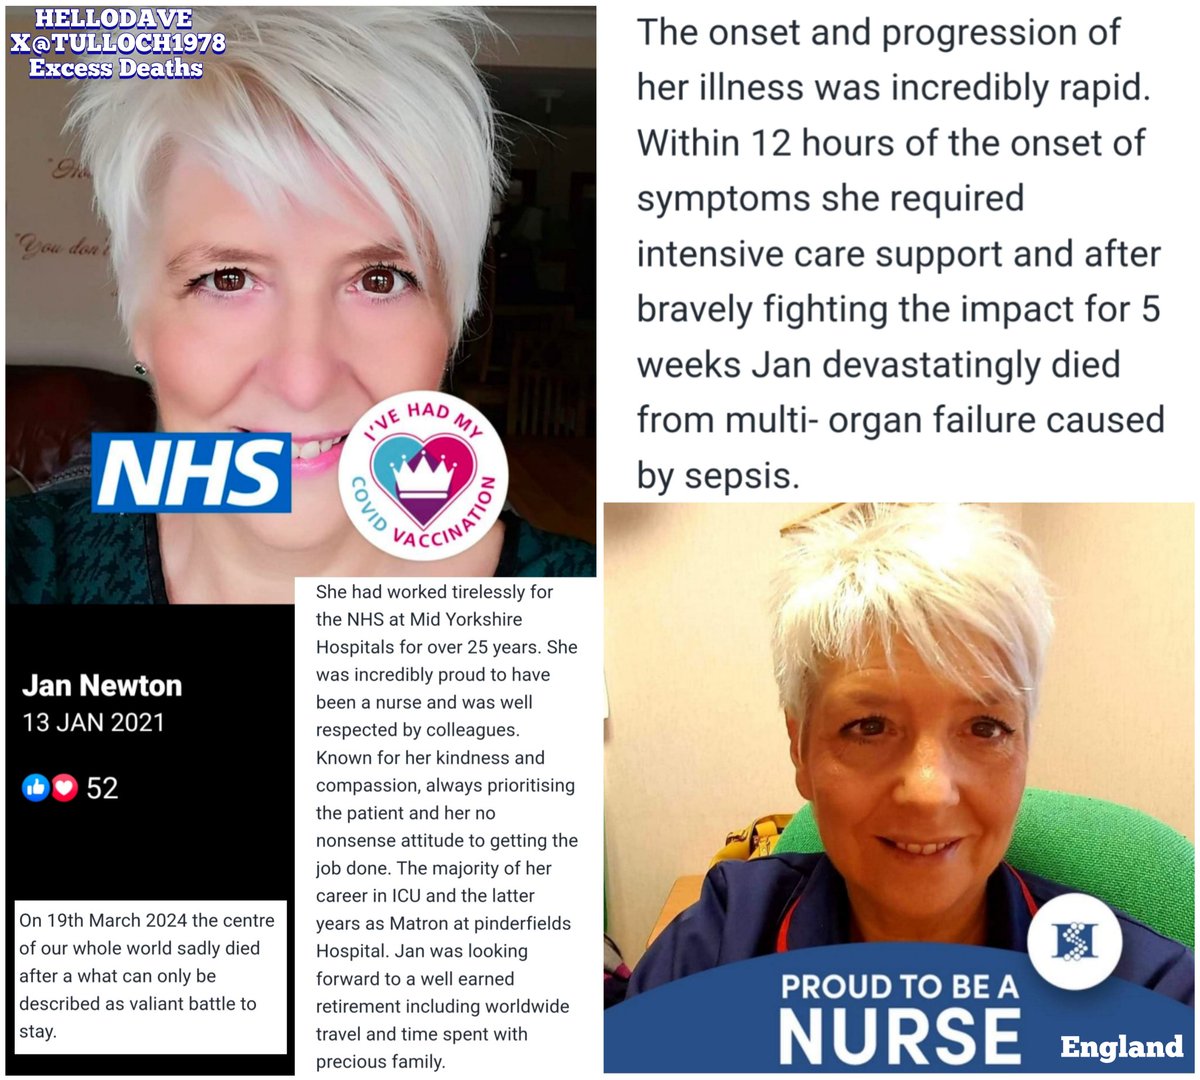 NHS England Nurse: Dead. 'I've Had My COVID Vaccination' #Pfizer 'The onset & progression of her illness was incredibly rapid. After bravely fighting the impact for 5 weeks Jan devastatingly died from multi-organ failure.' (March 2024) #diedsuddenly justgiving.com/page/jessica-m…